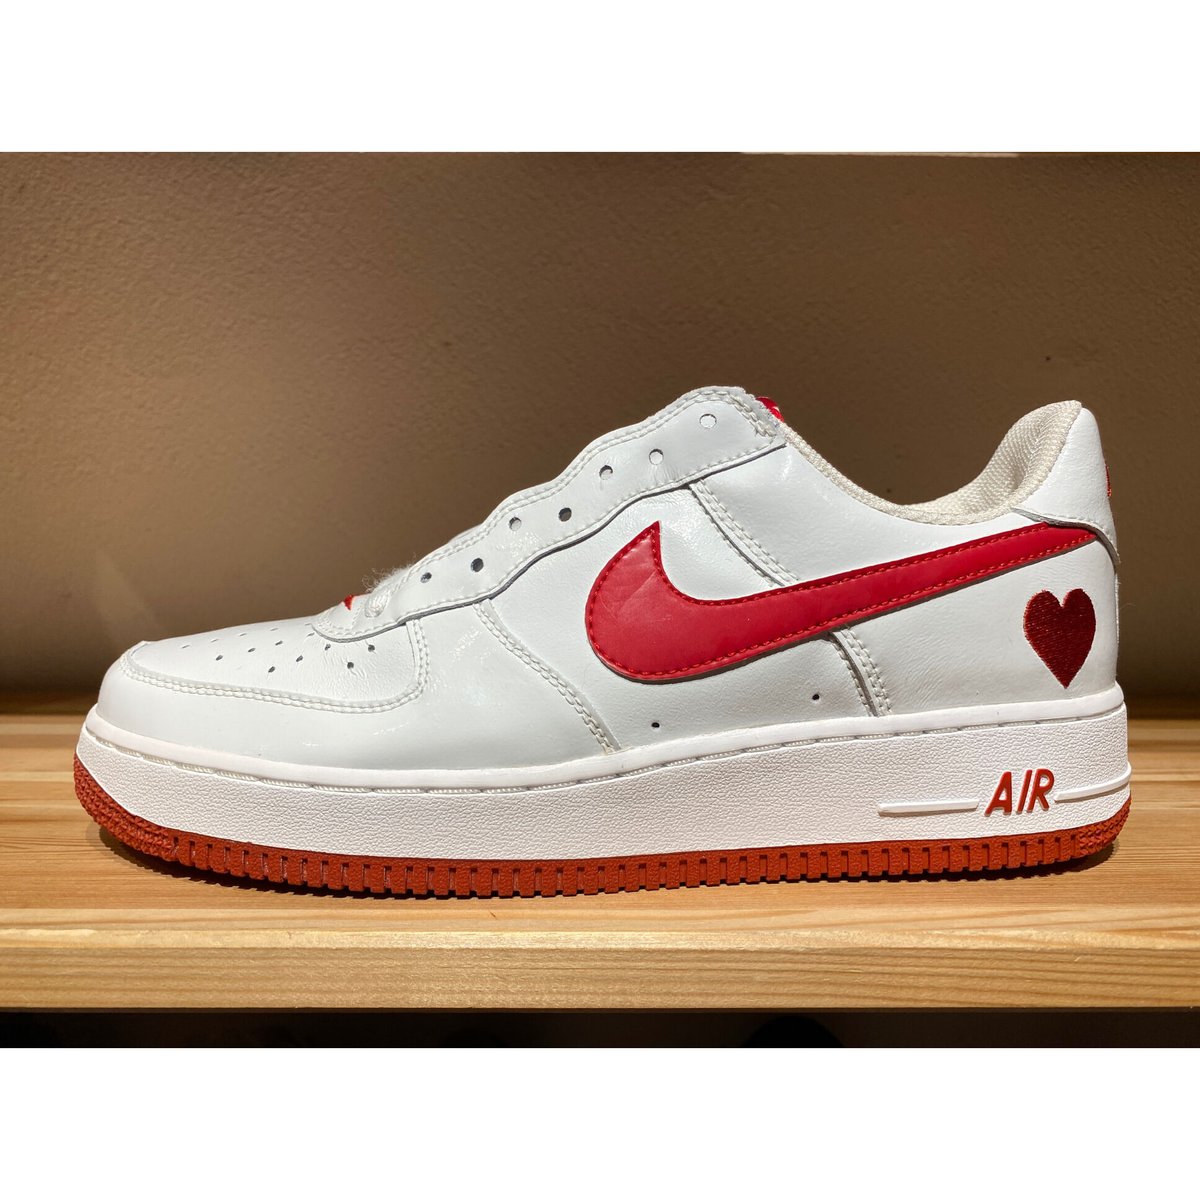 NIKE AIR FORCE 1 '07 VALENTINE'S DAY